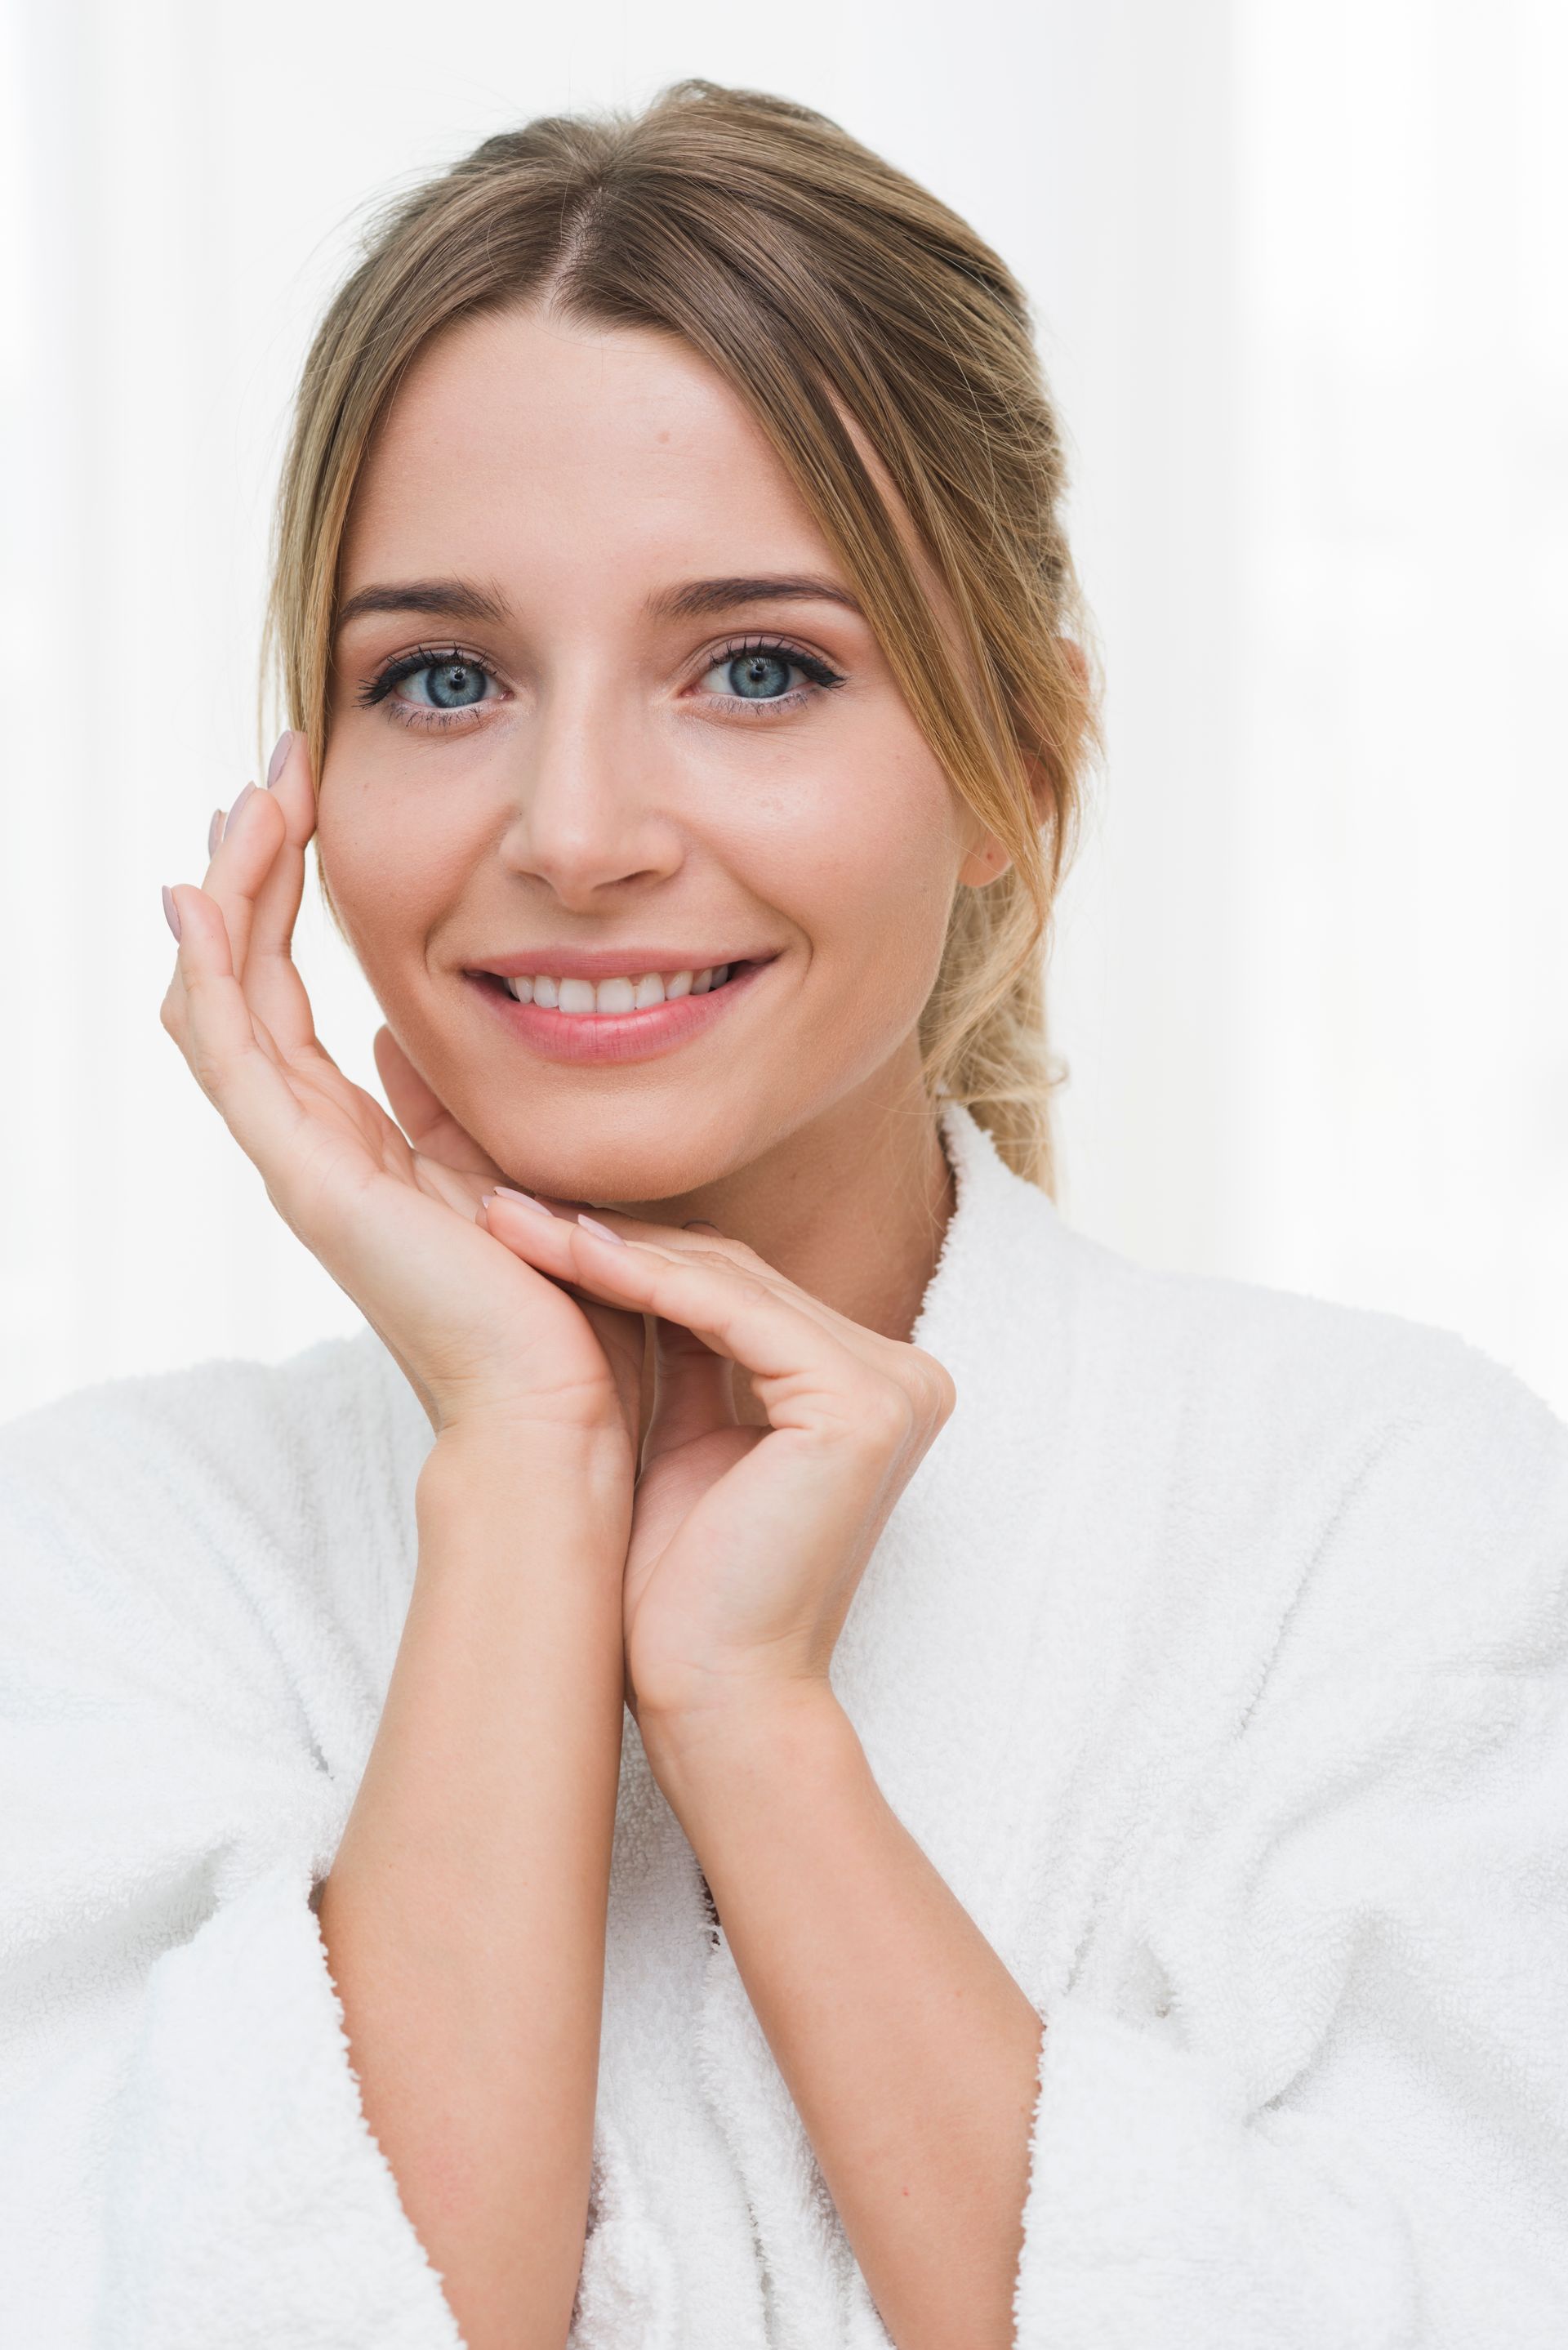 A woman in a bathrobe is smiling and touching her face.